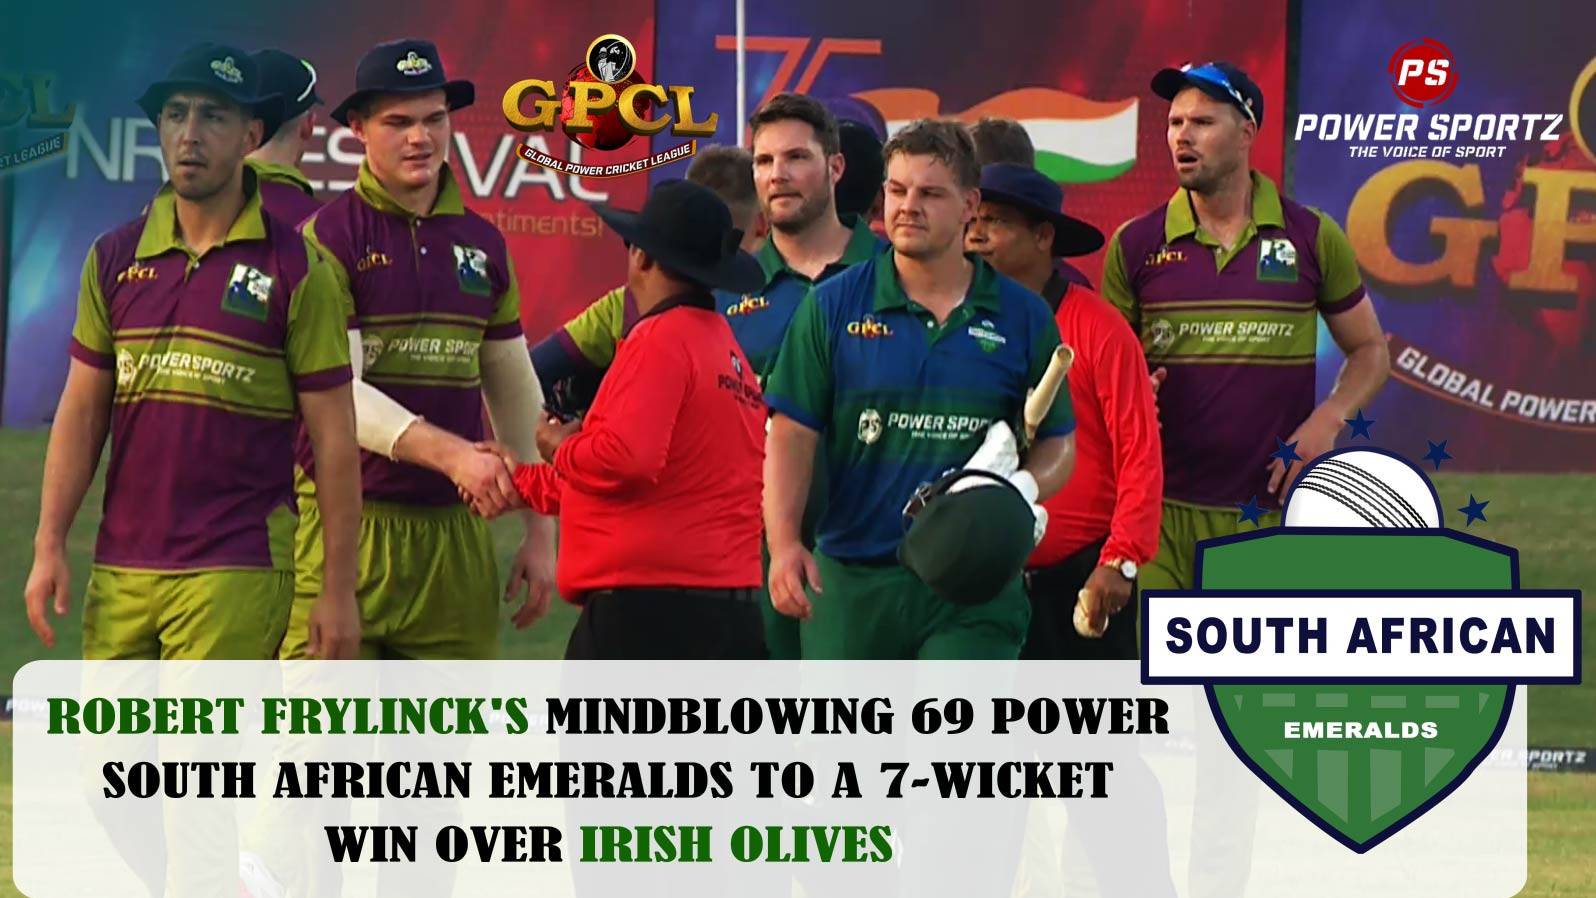 GPCL T20: Robert Frylinck’s whirlwind 69 secures South African Emeralds' 7-wicket win over Irish Olives